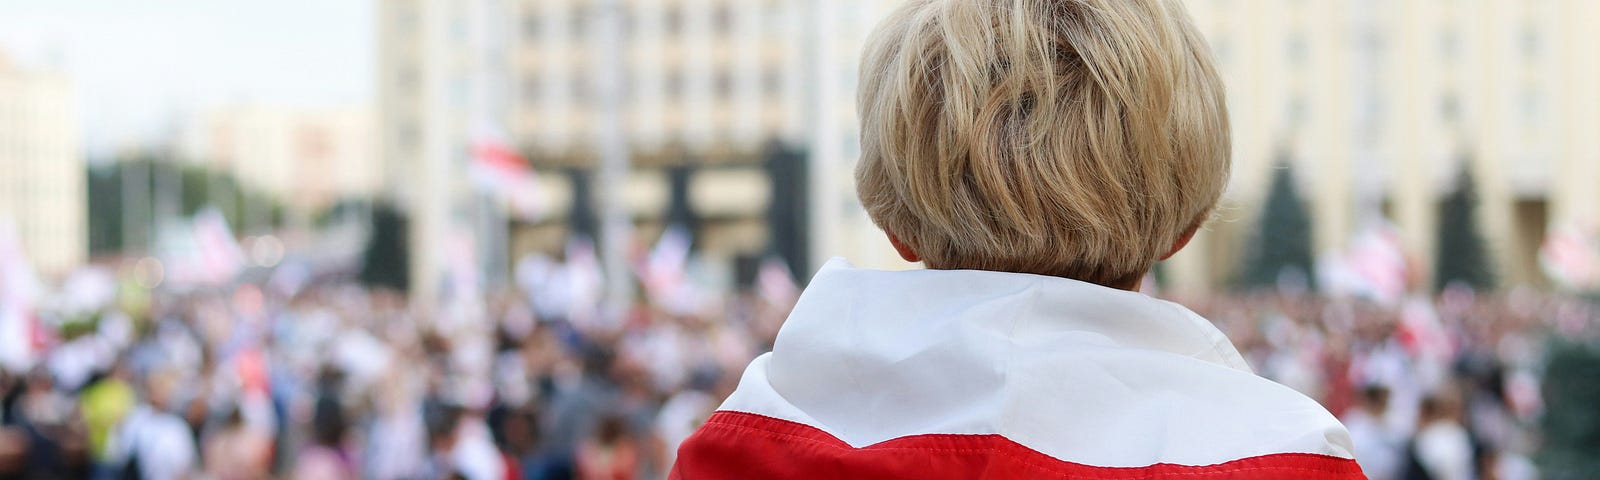 A person draped in a red and white flag observes a group of demonstrators in a city square, from a distance. The demonstrators are out of focus — only the observer, viewed from behind, is sharply focused.